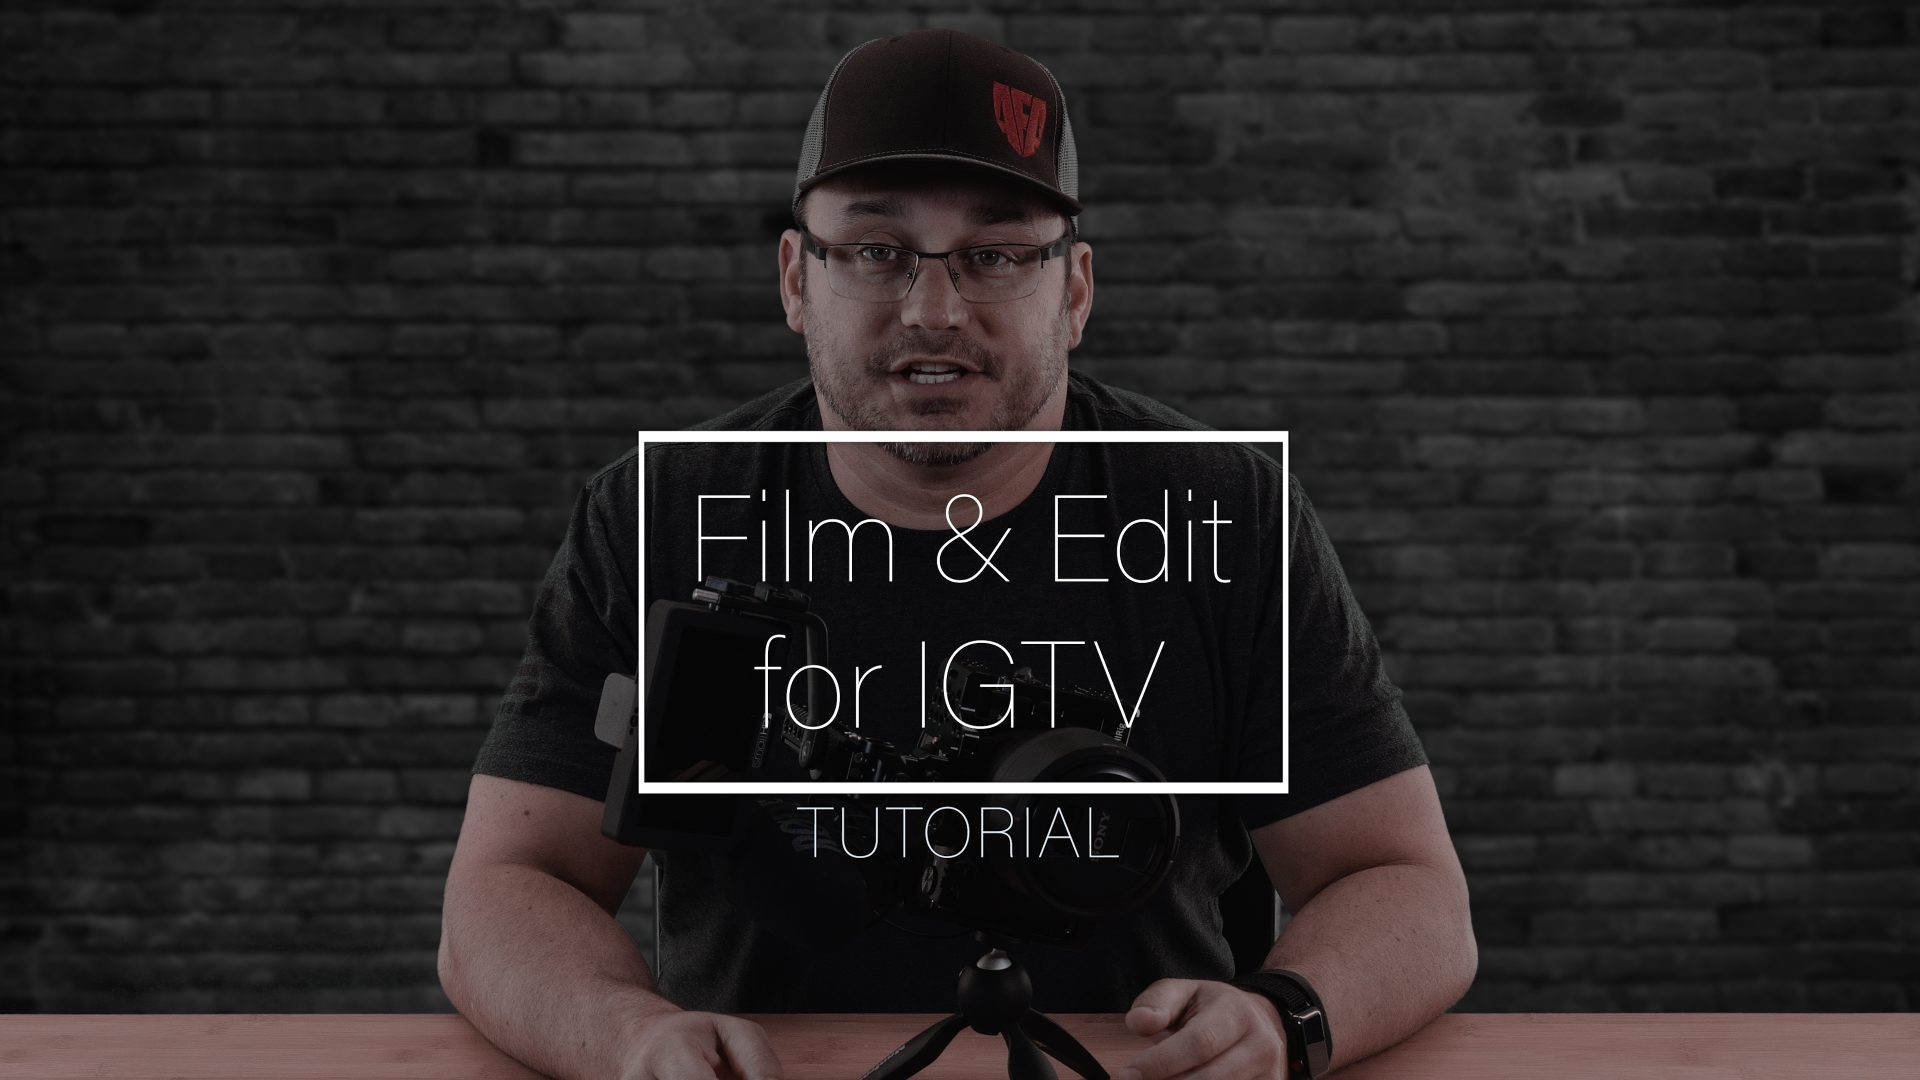 How to Film & Edit Video for IGTV